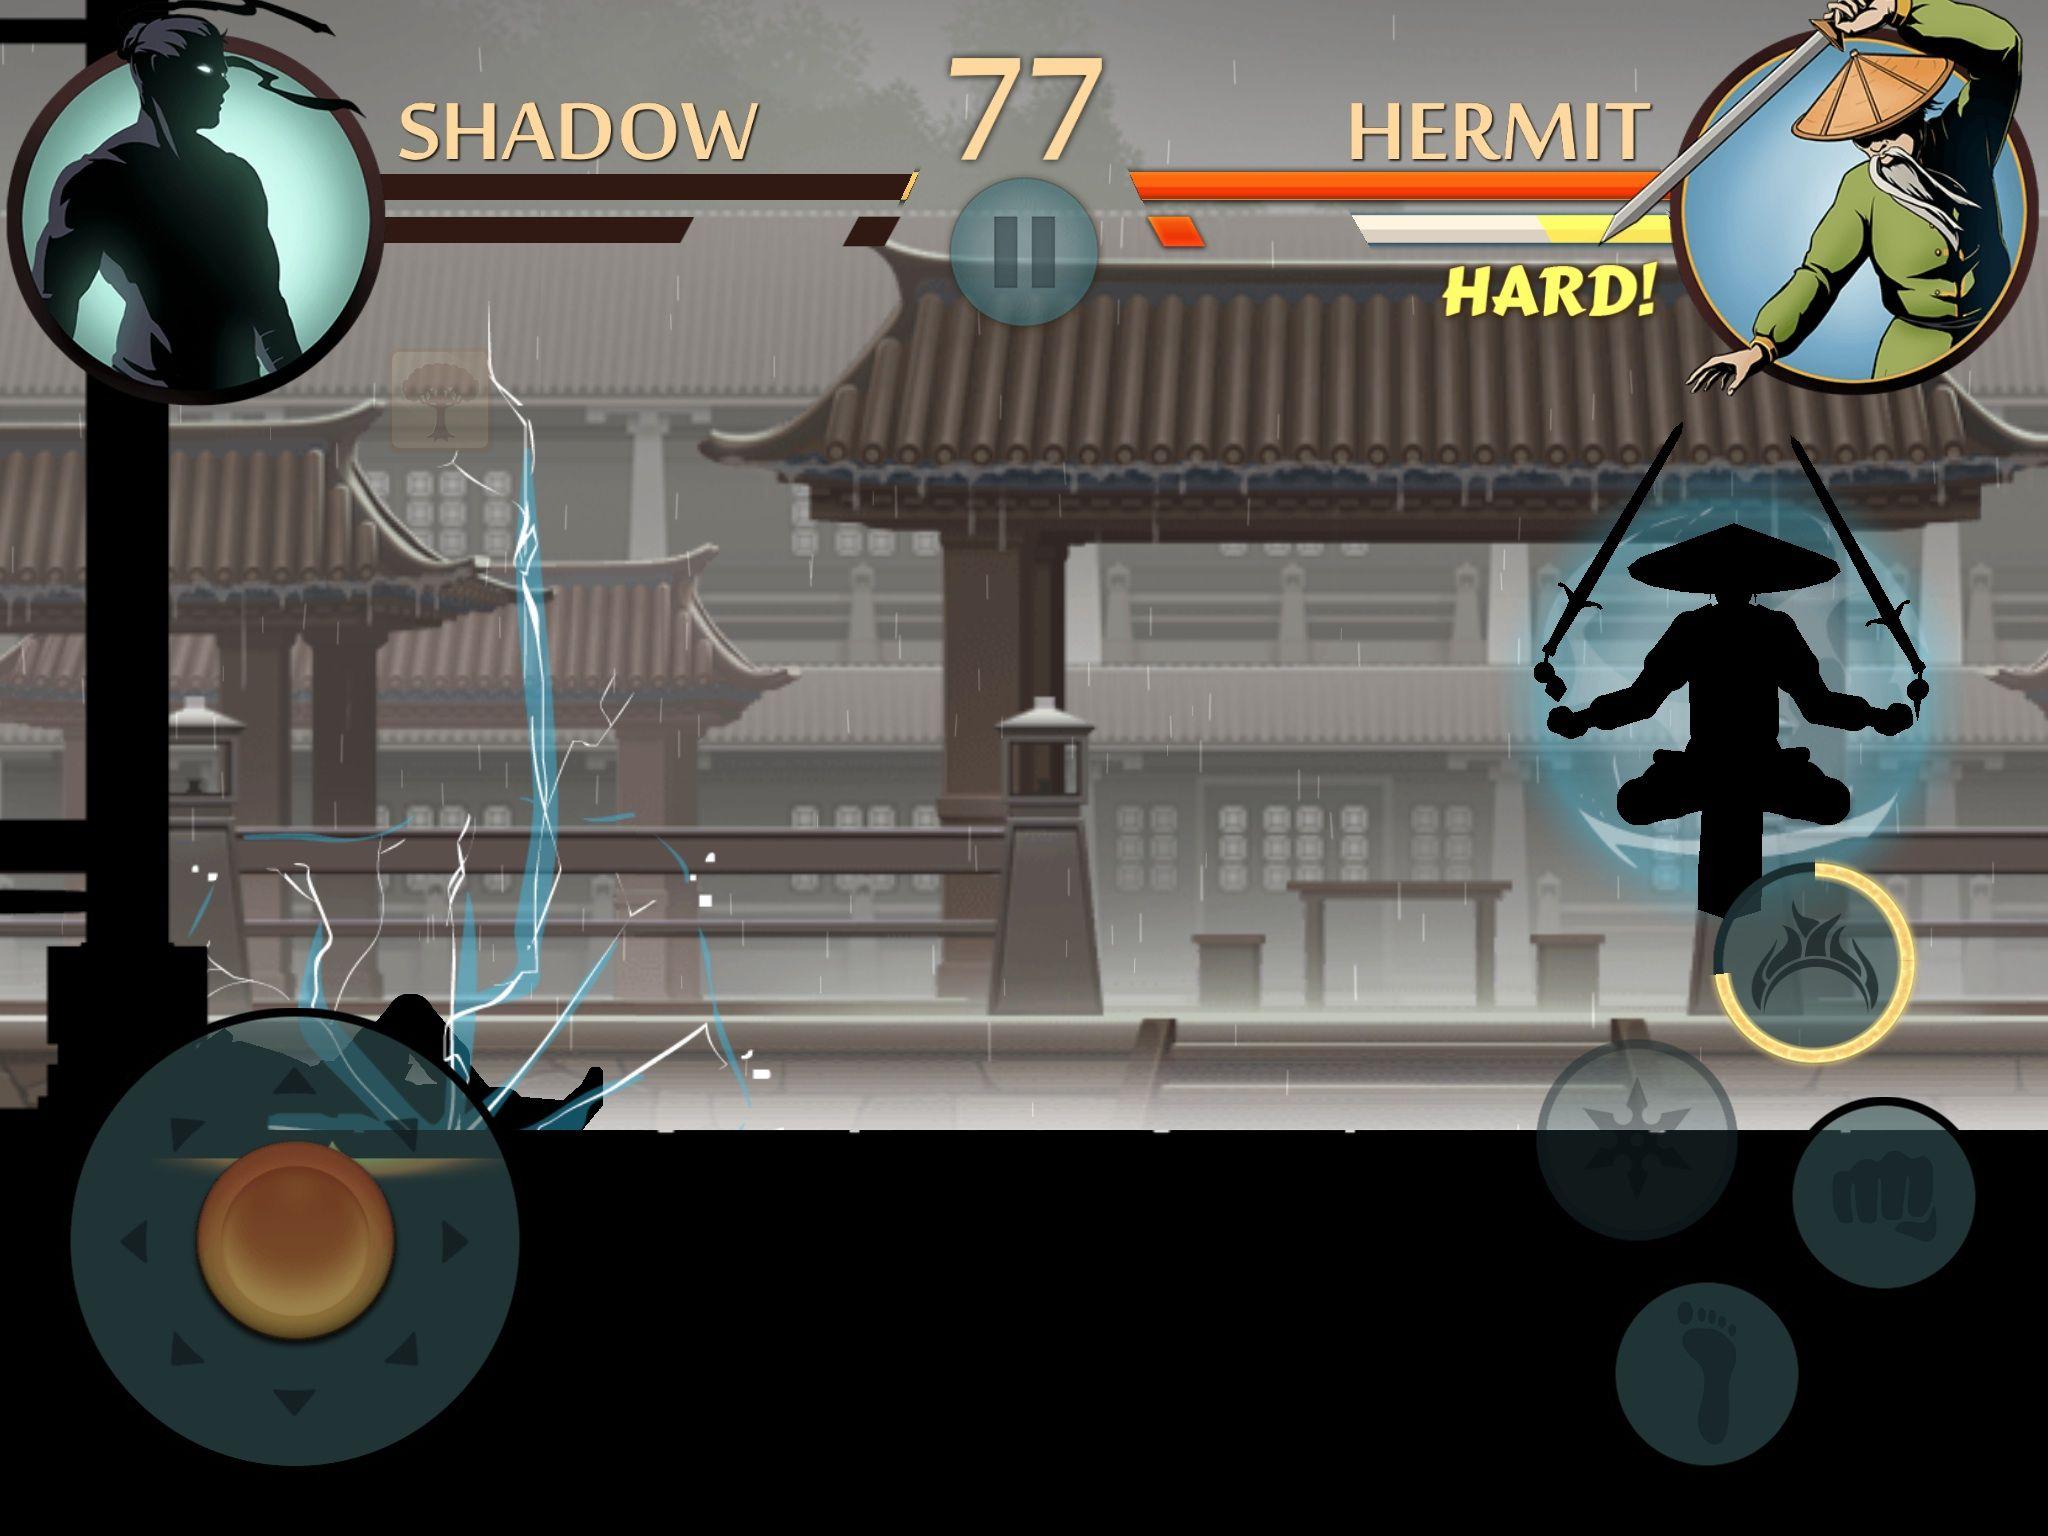 Showing posts & media for Hermit shadow fight wallpaper